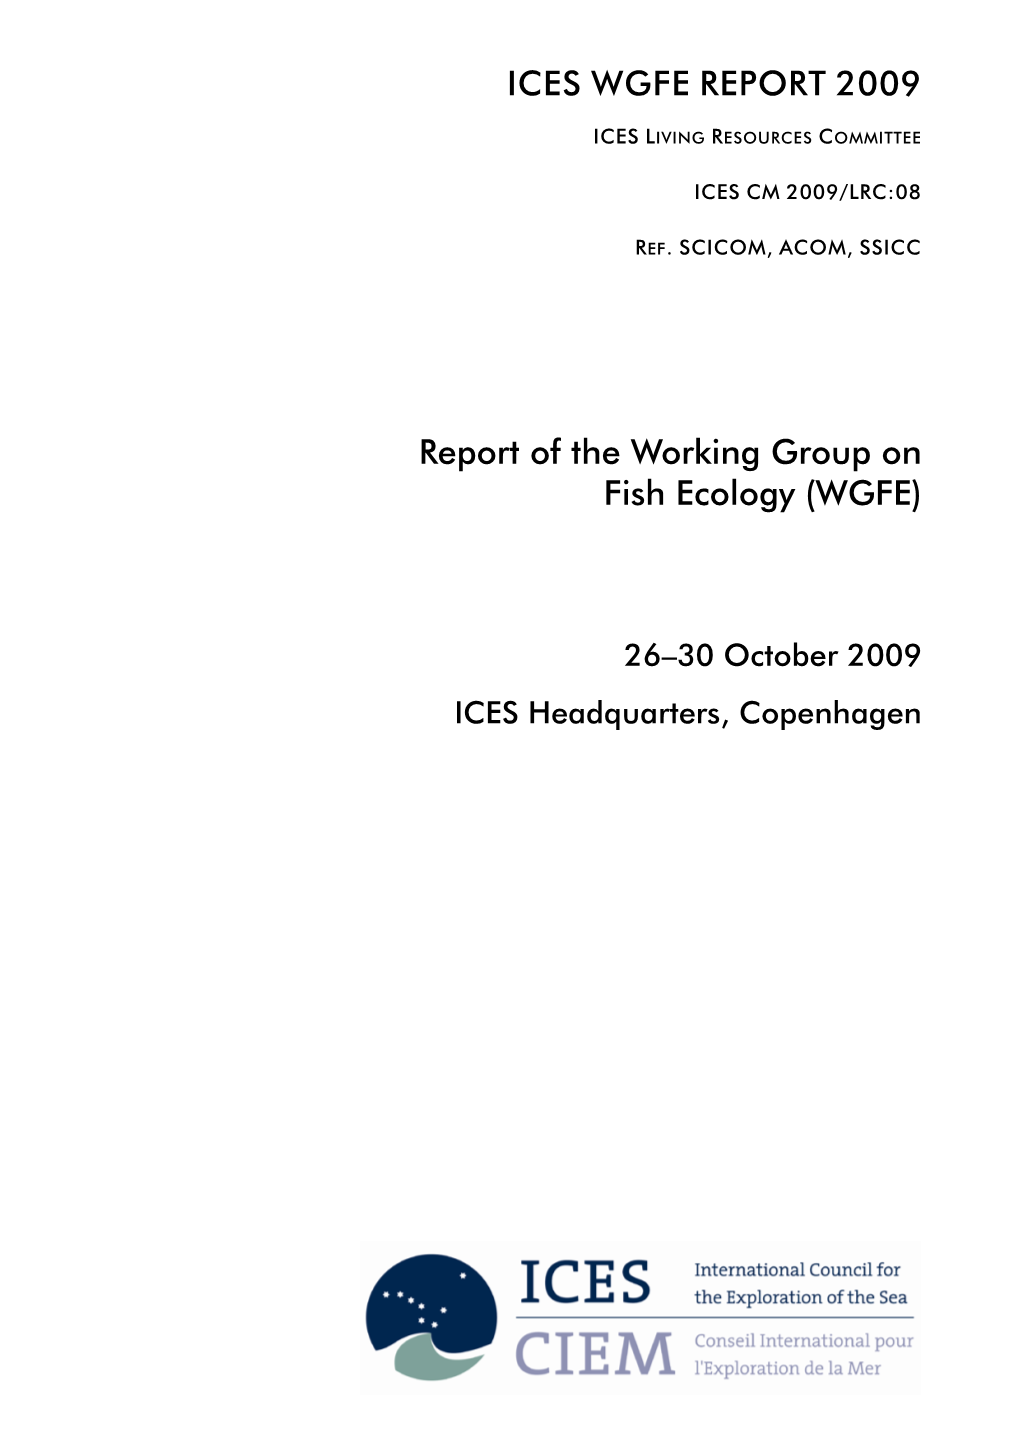 Report of the Working Group on Fish Ecology (WGFE). ICES CM 2009